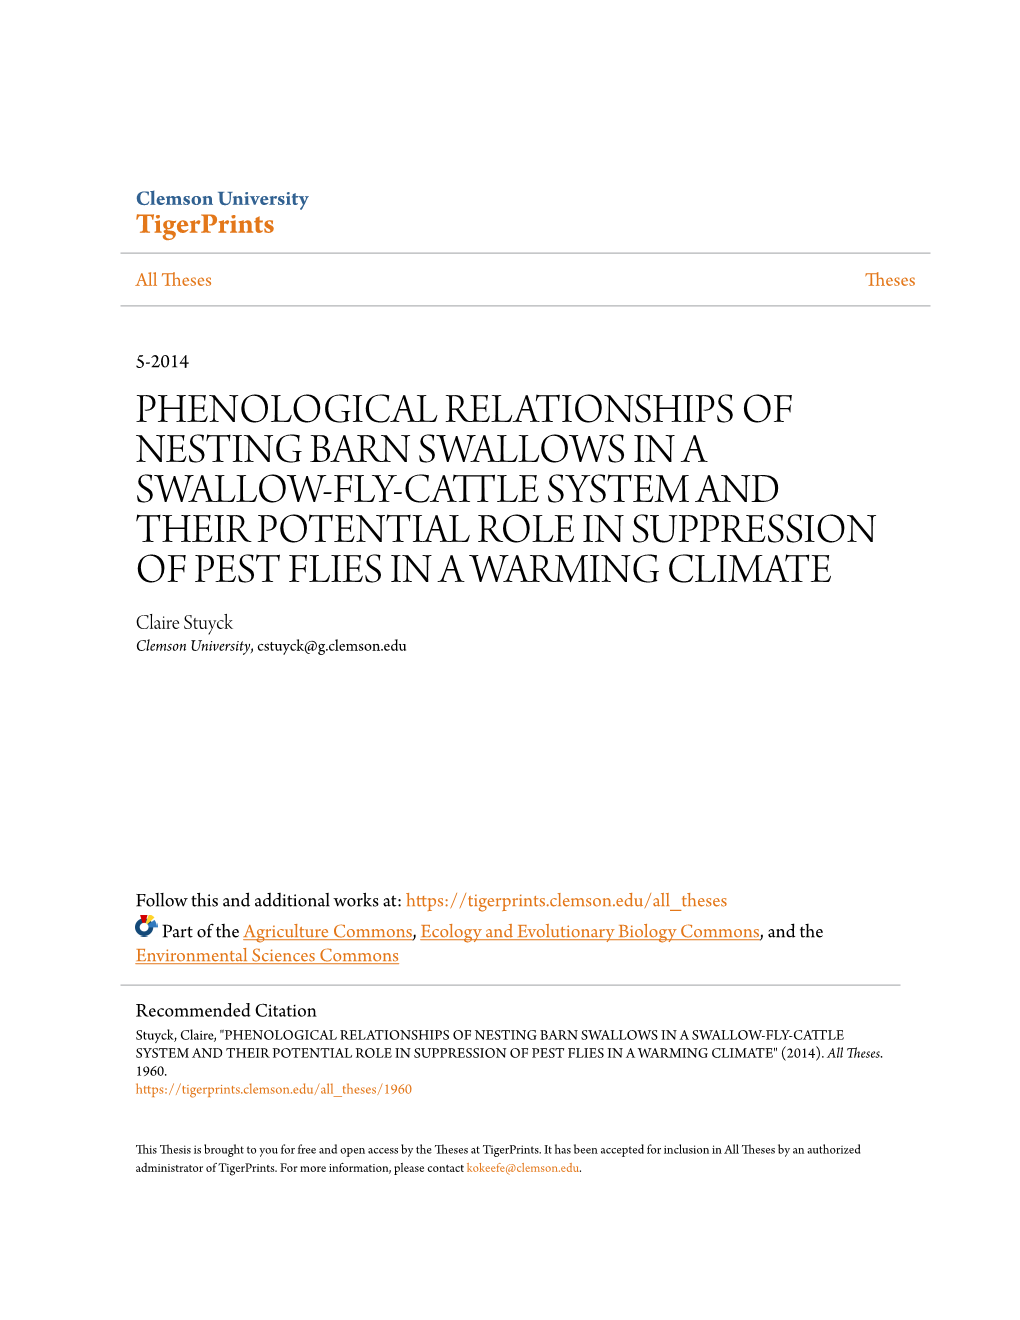 Phenological Relationships of Nesting Barn Swallows